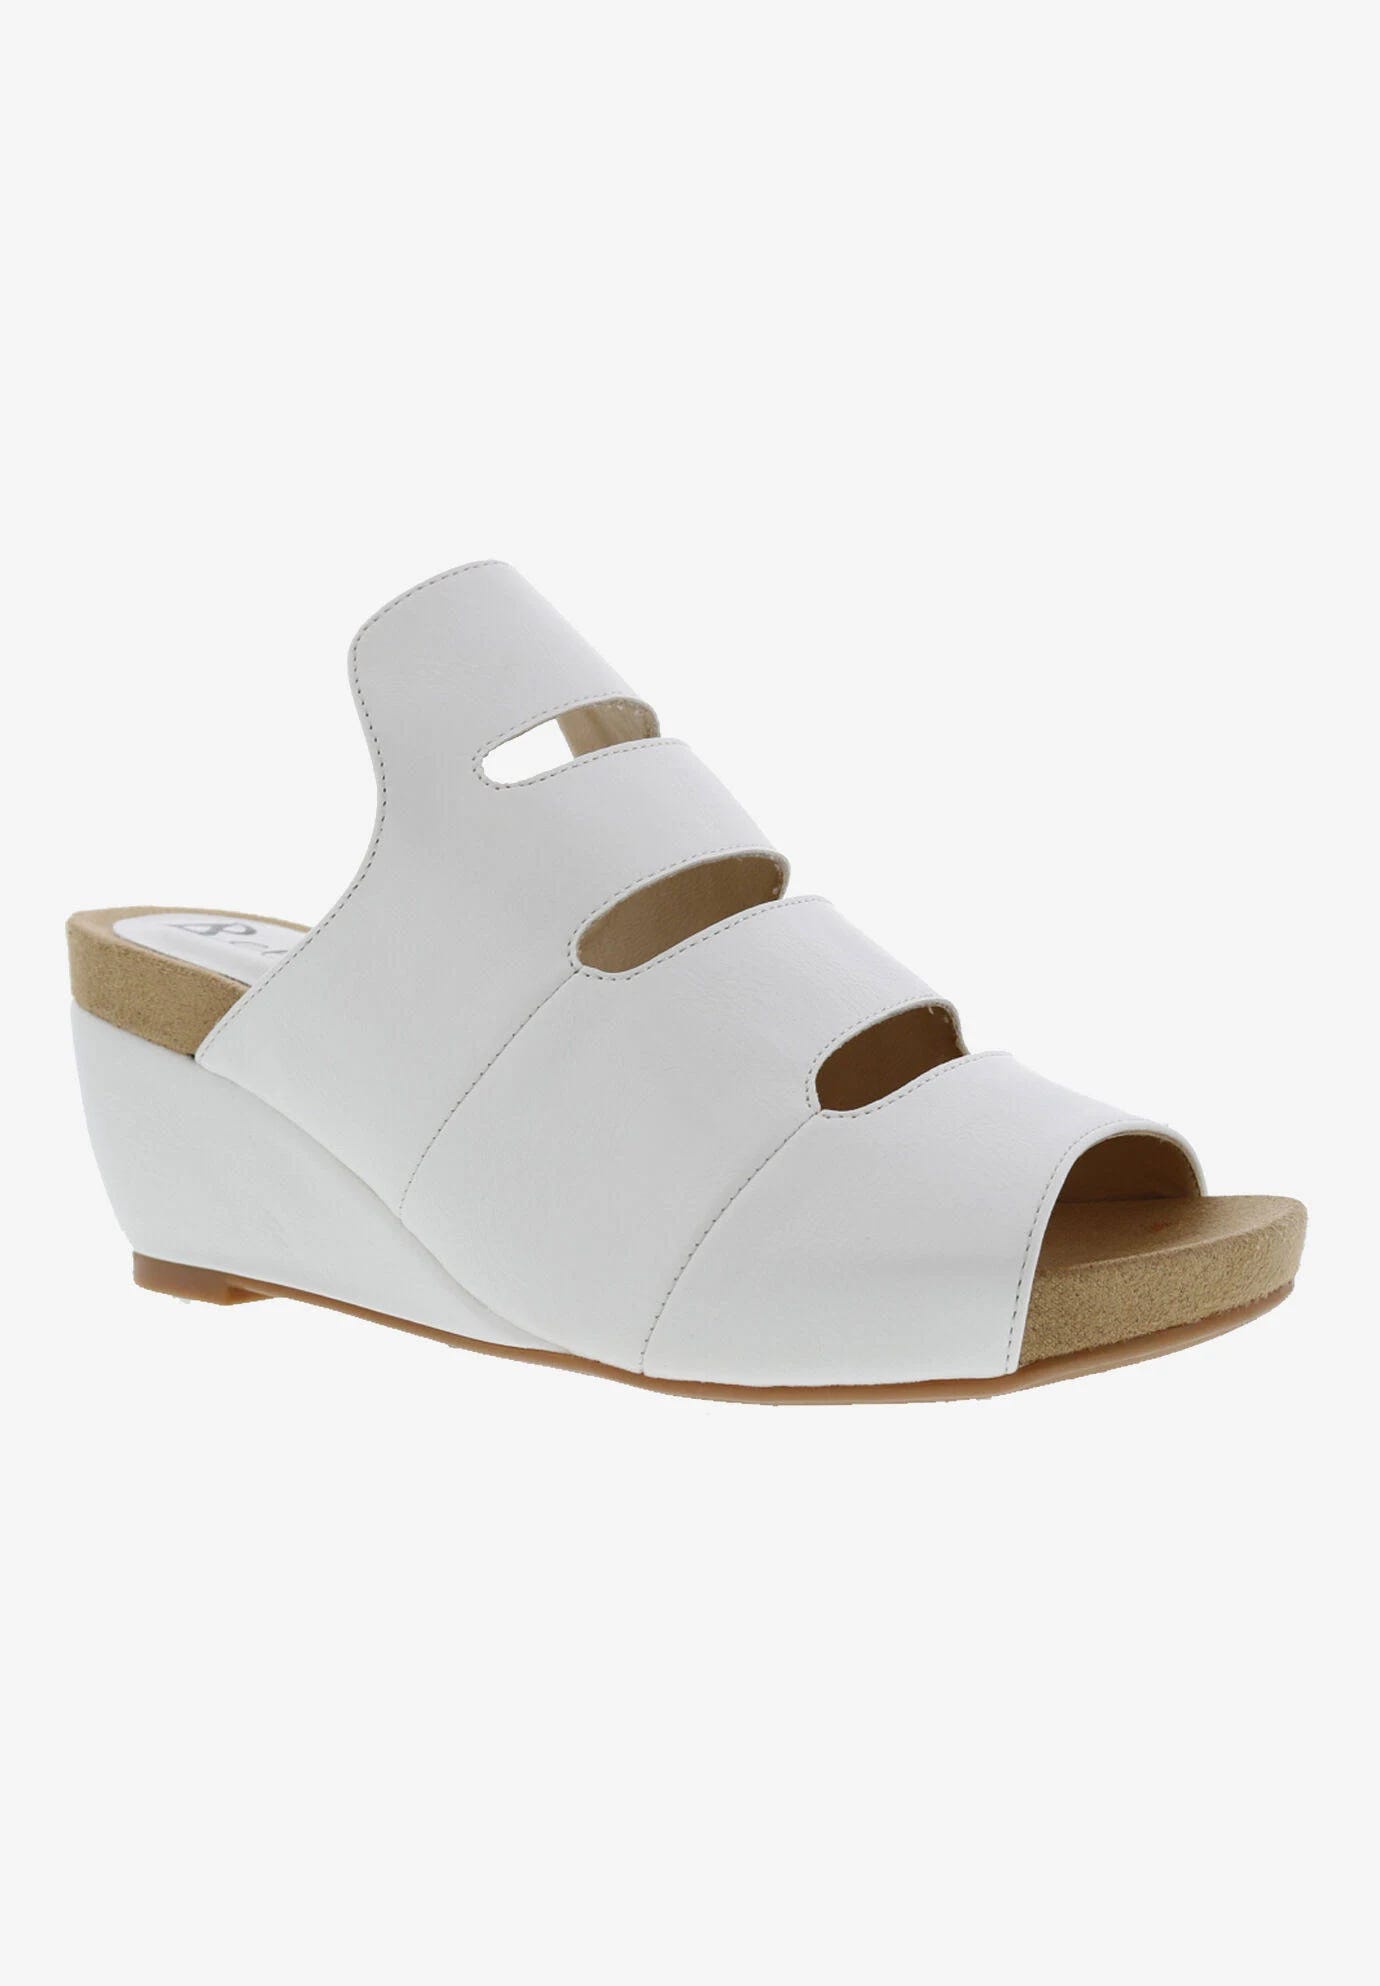 Upgrade your wardrobe with the trendy Bellini WHIT wedge sandals in white | Image